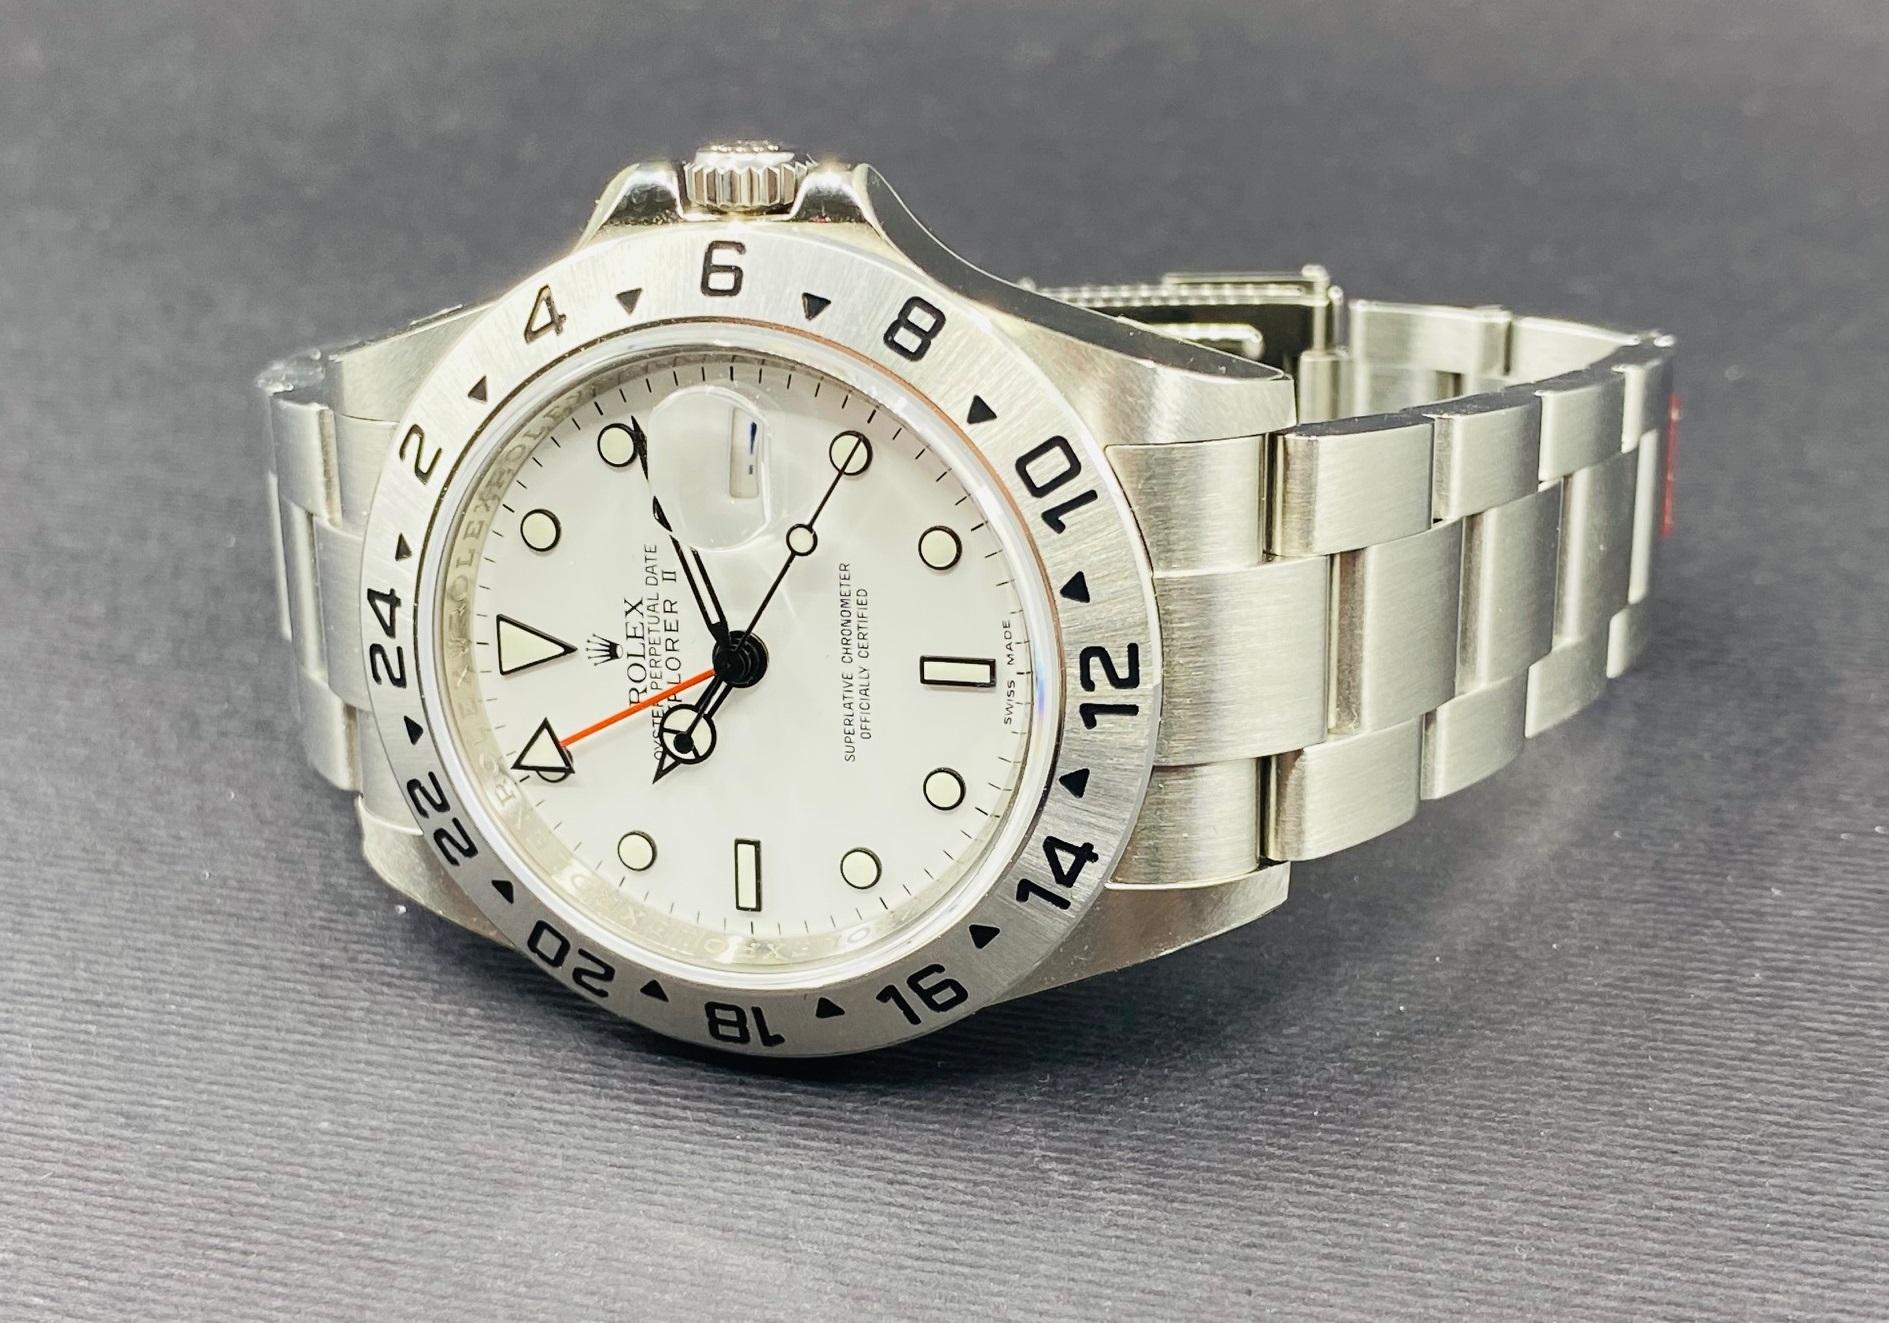 Oyster Perpetual Date Explorer II White Dial - 16570